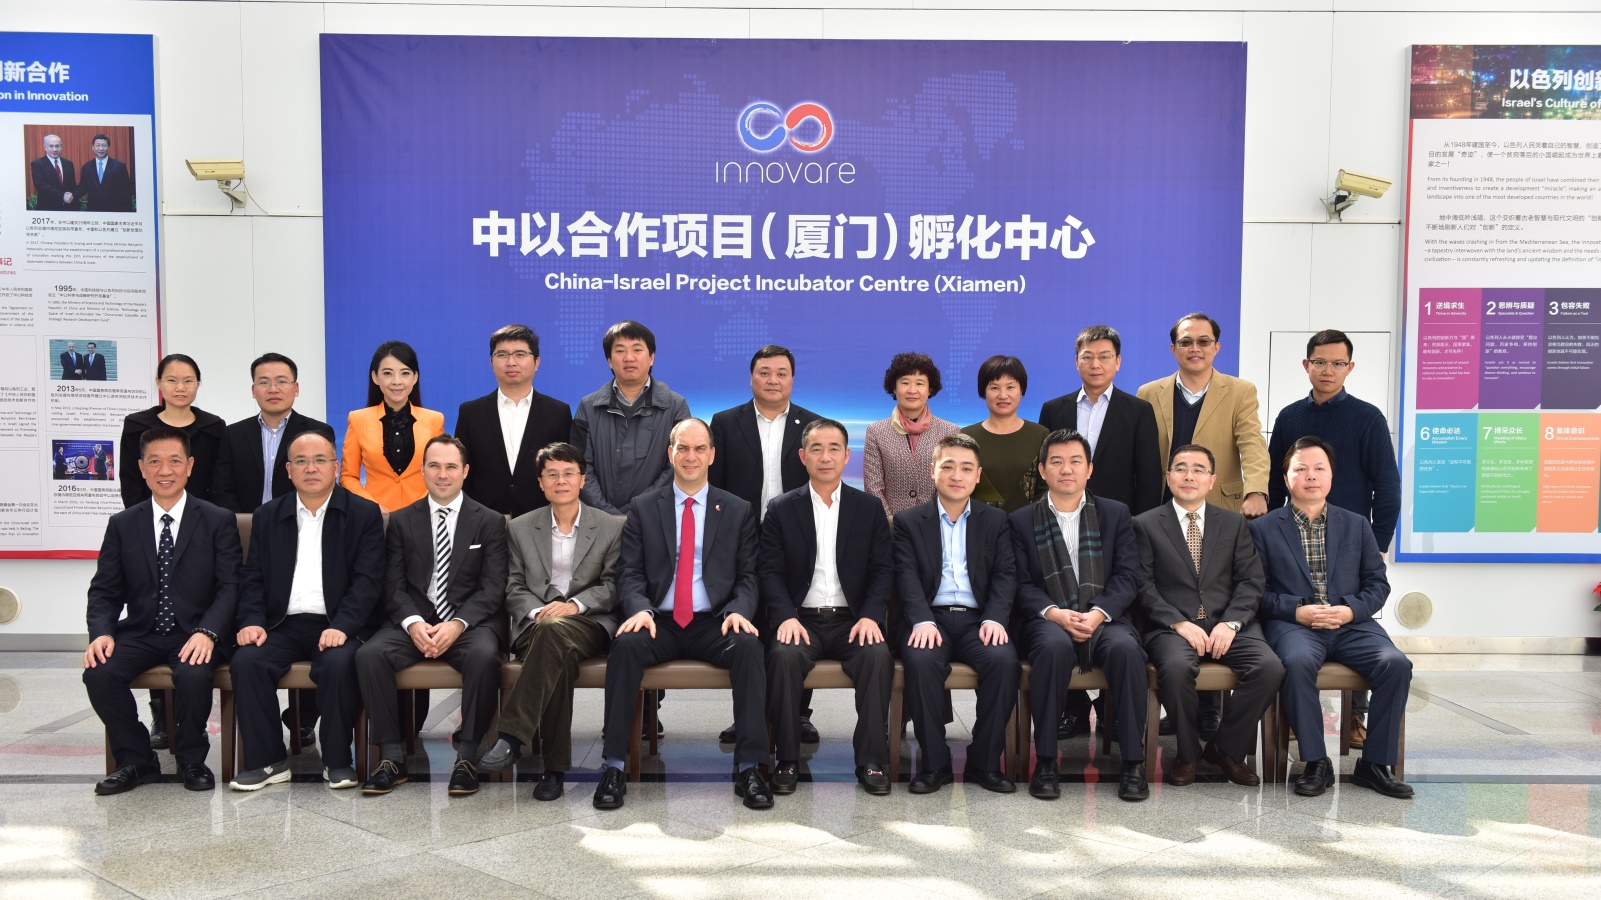 Dignitaries and company heads at the opening of Innovare in Xiamen. Photo: courtesy